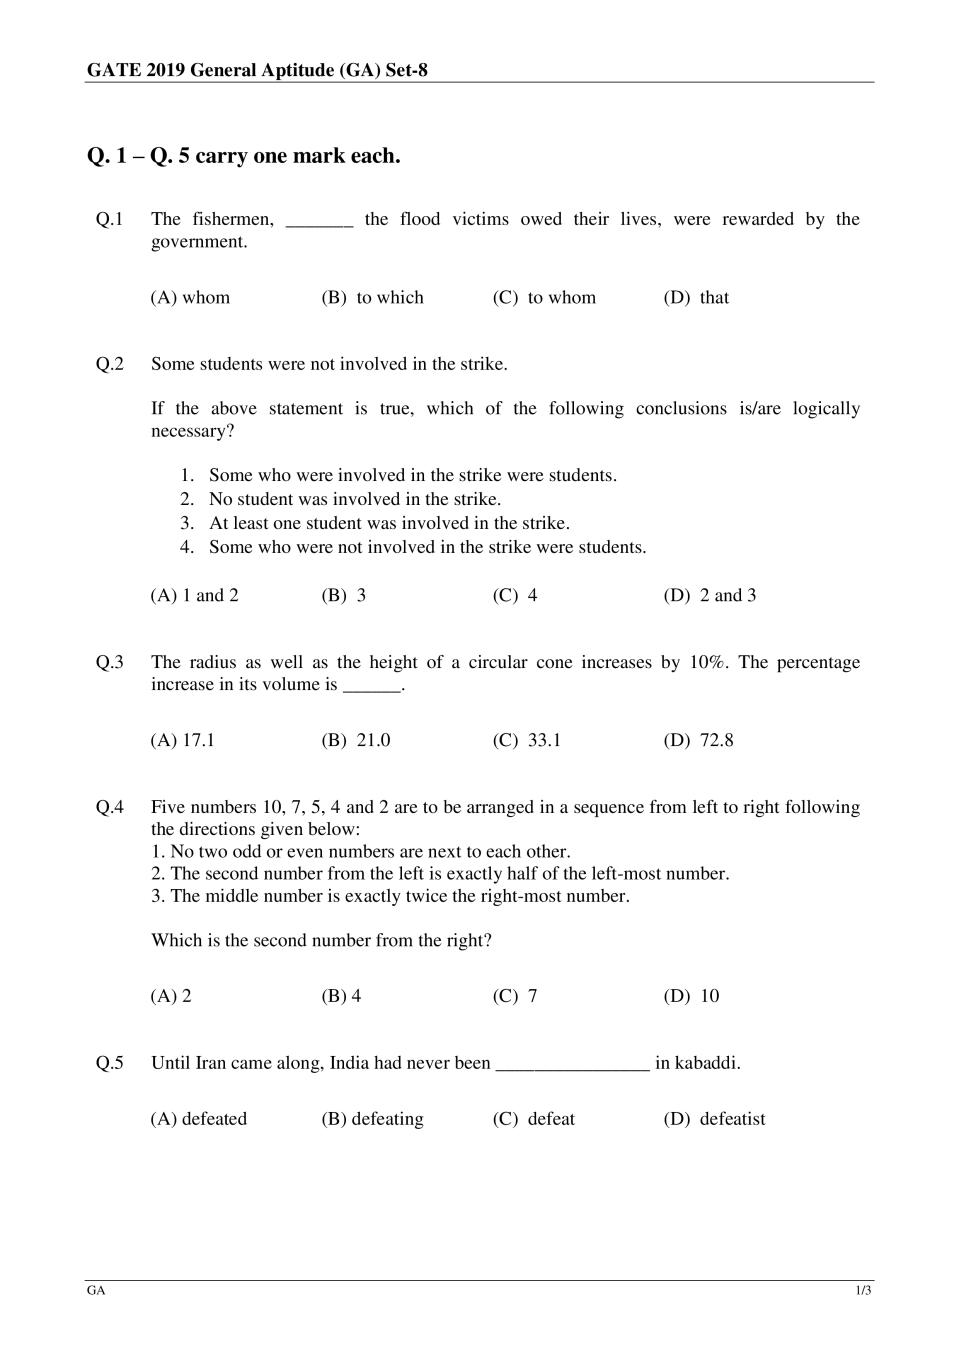 GATE 2019 STATISTICS Question Paper with Answer - Page 1